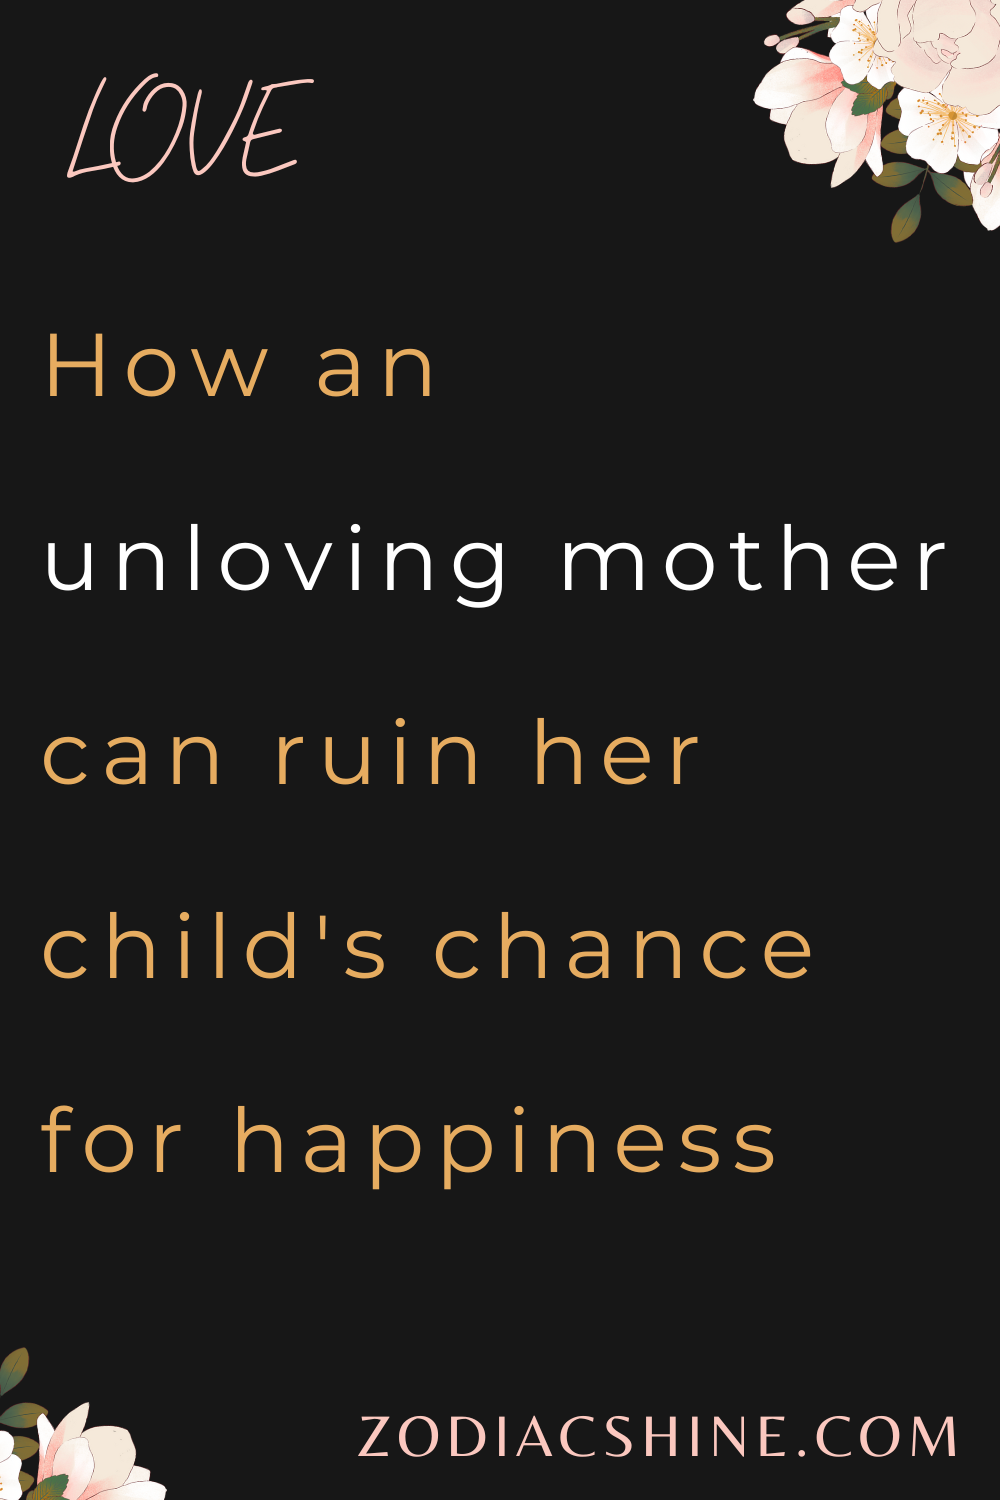 How an unloving mother can ruin her child's chance for happiness